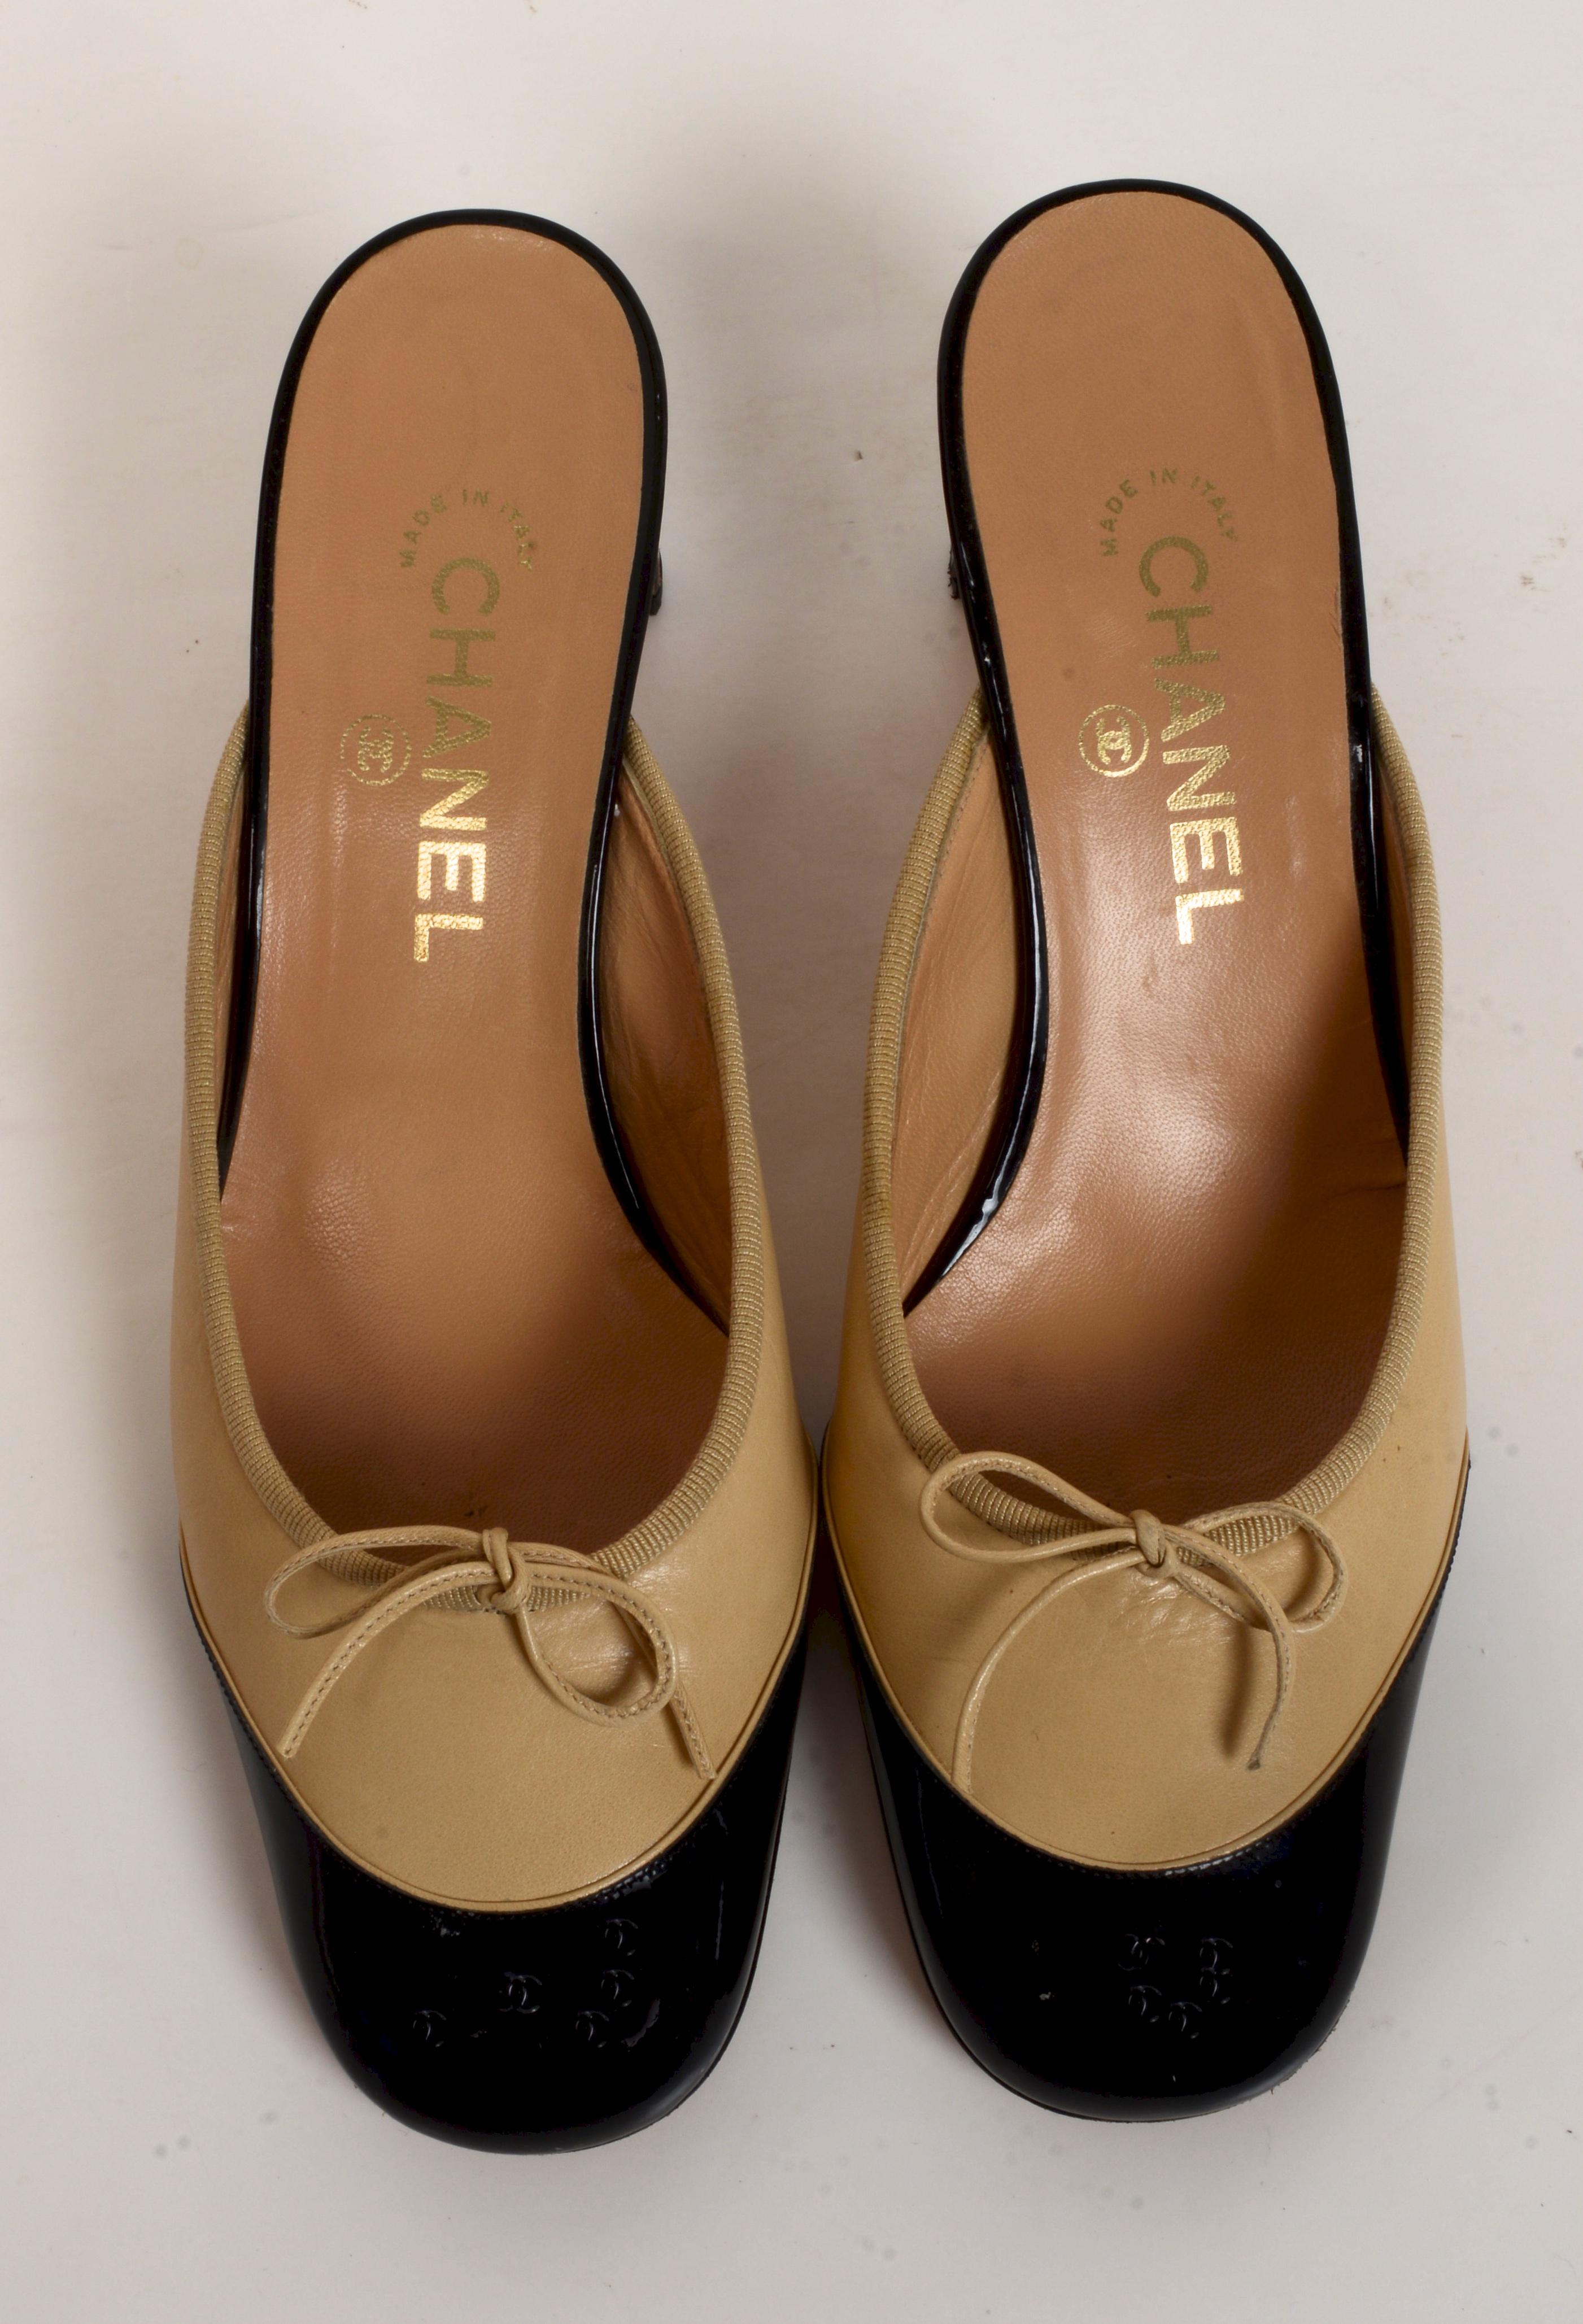 chanel black and beige shoes